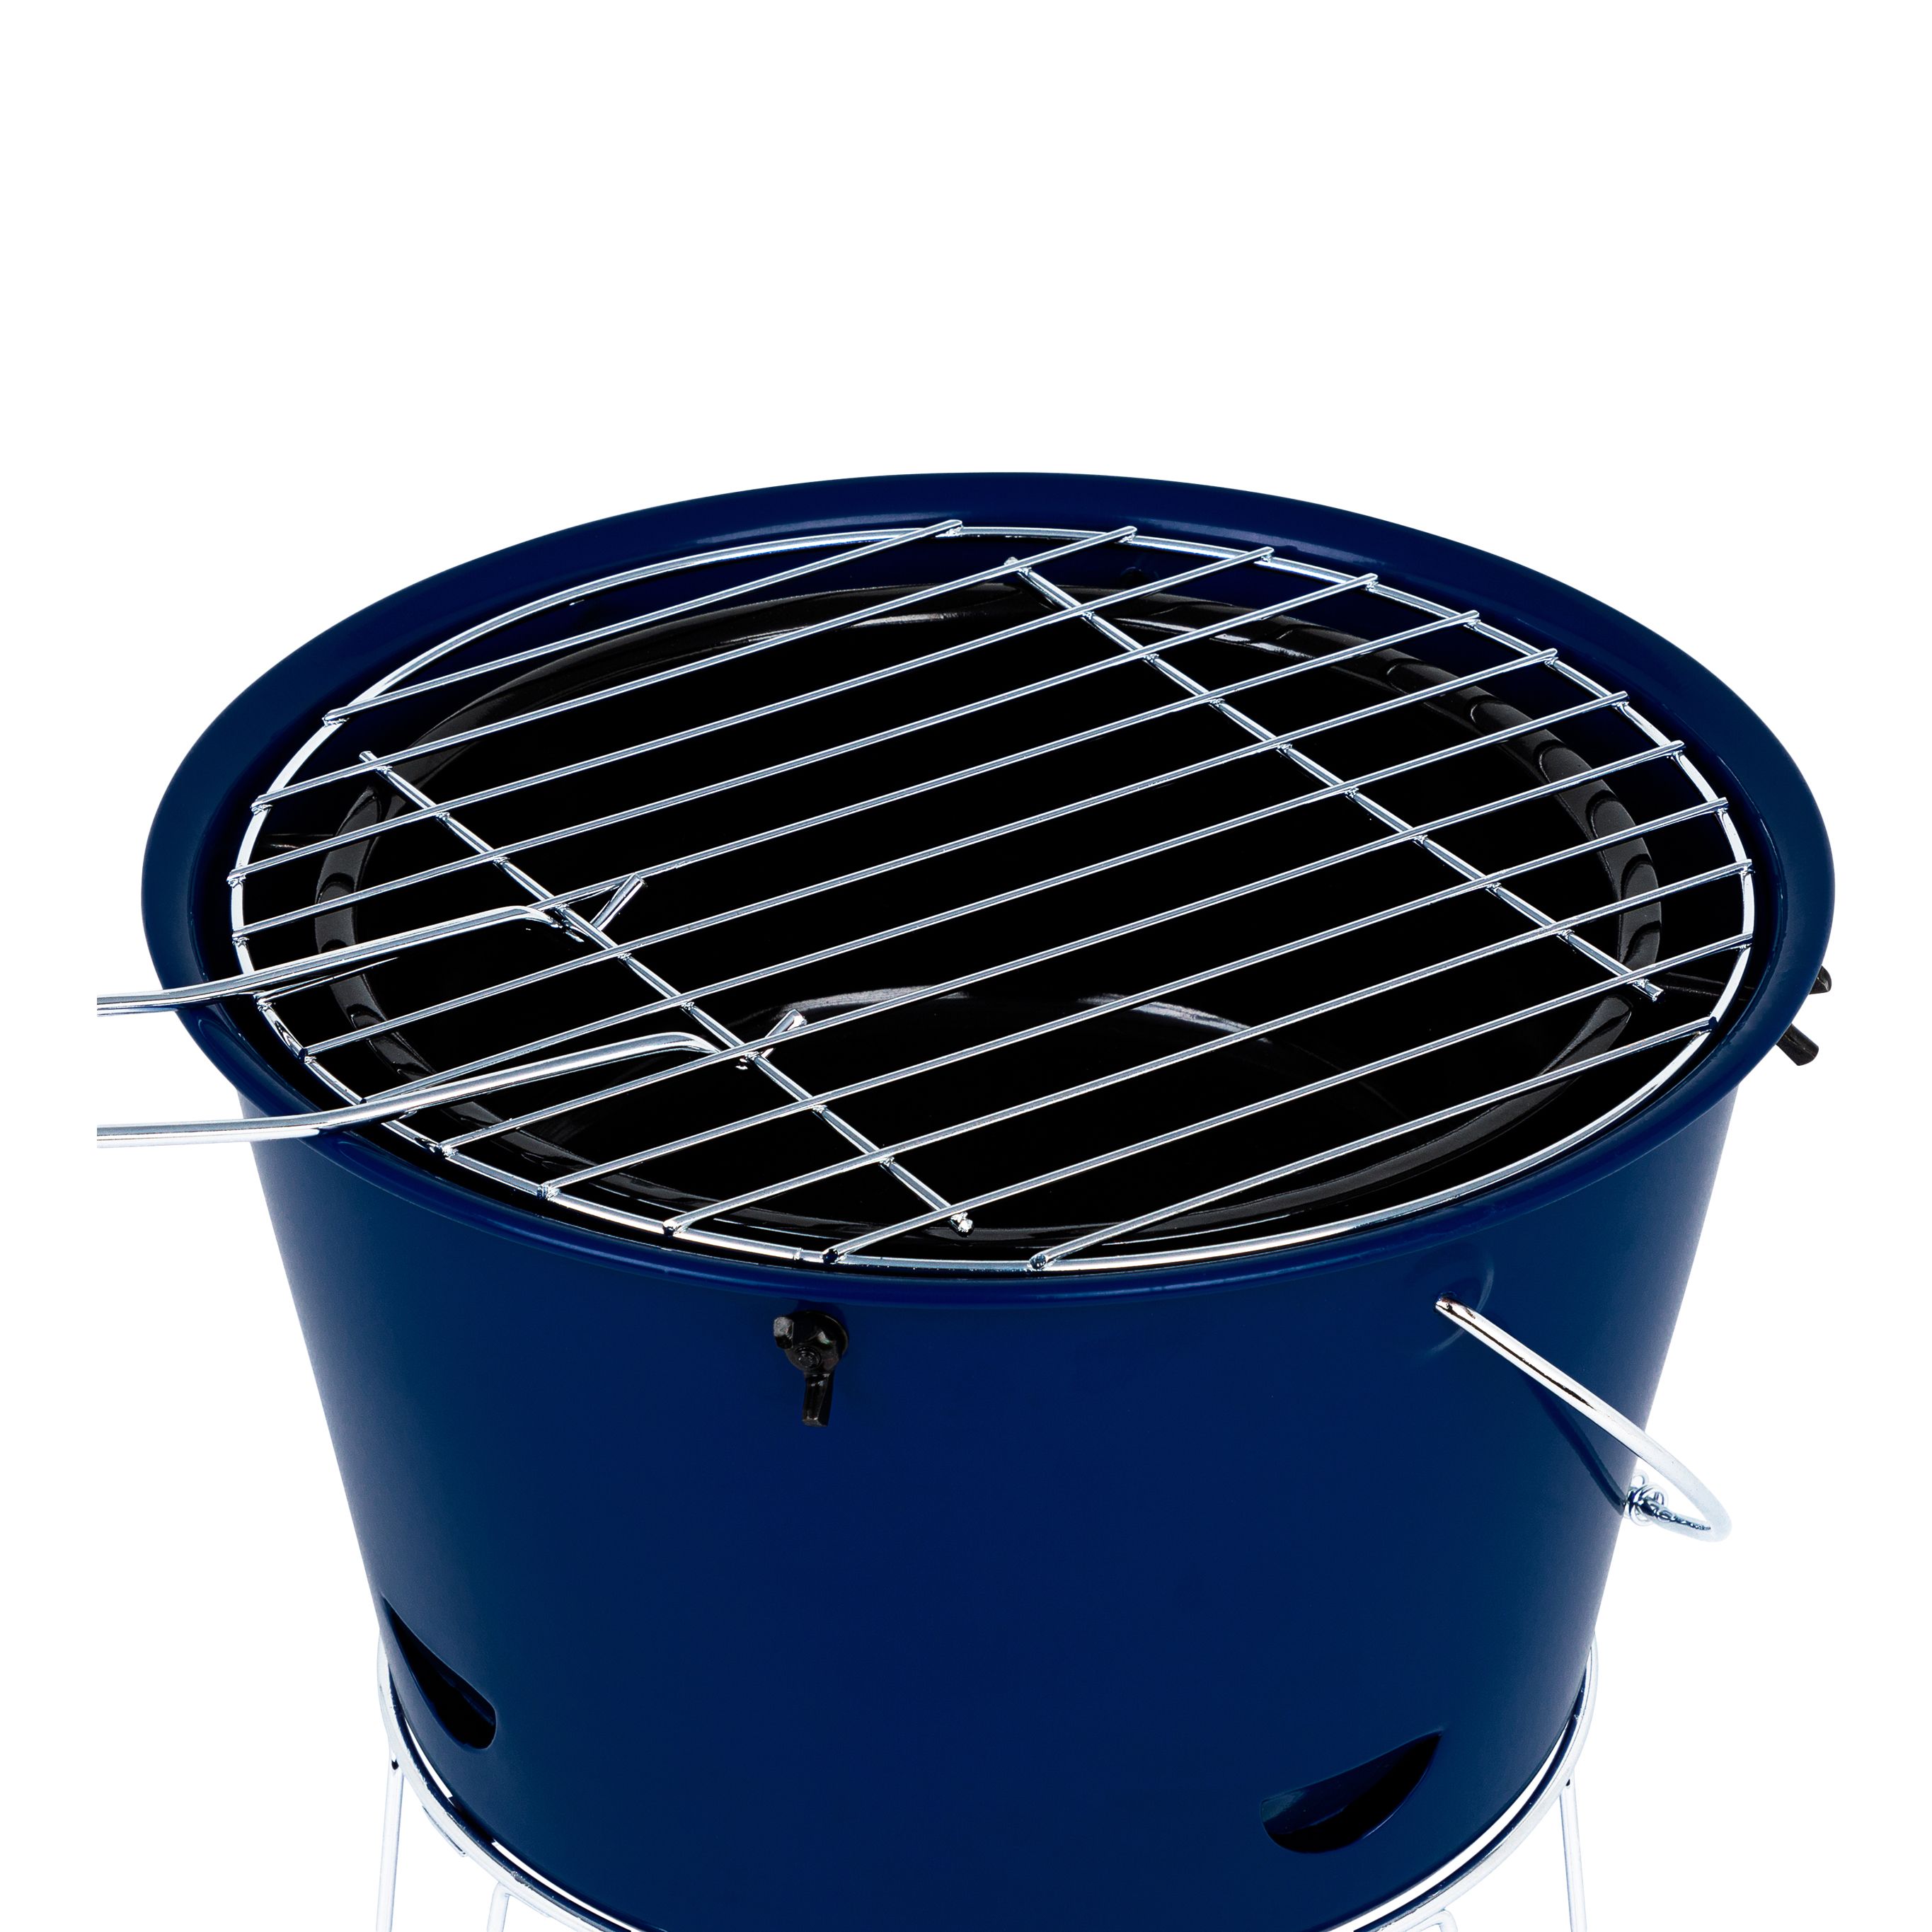 TOM 300260i004 Blue Charcoal Bucket barbecue (D) 265mm